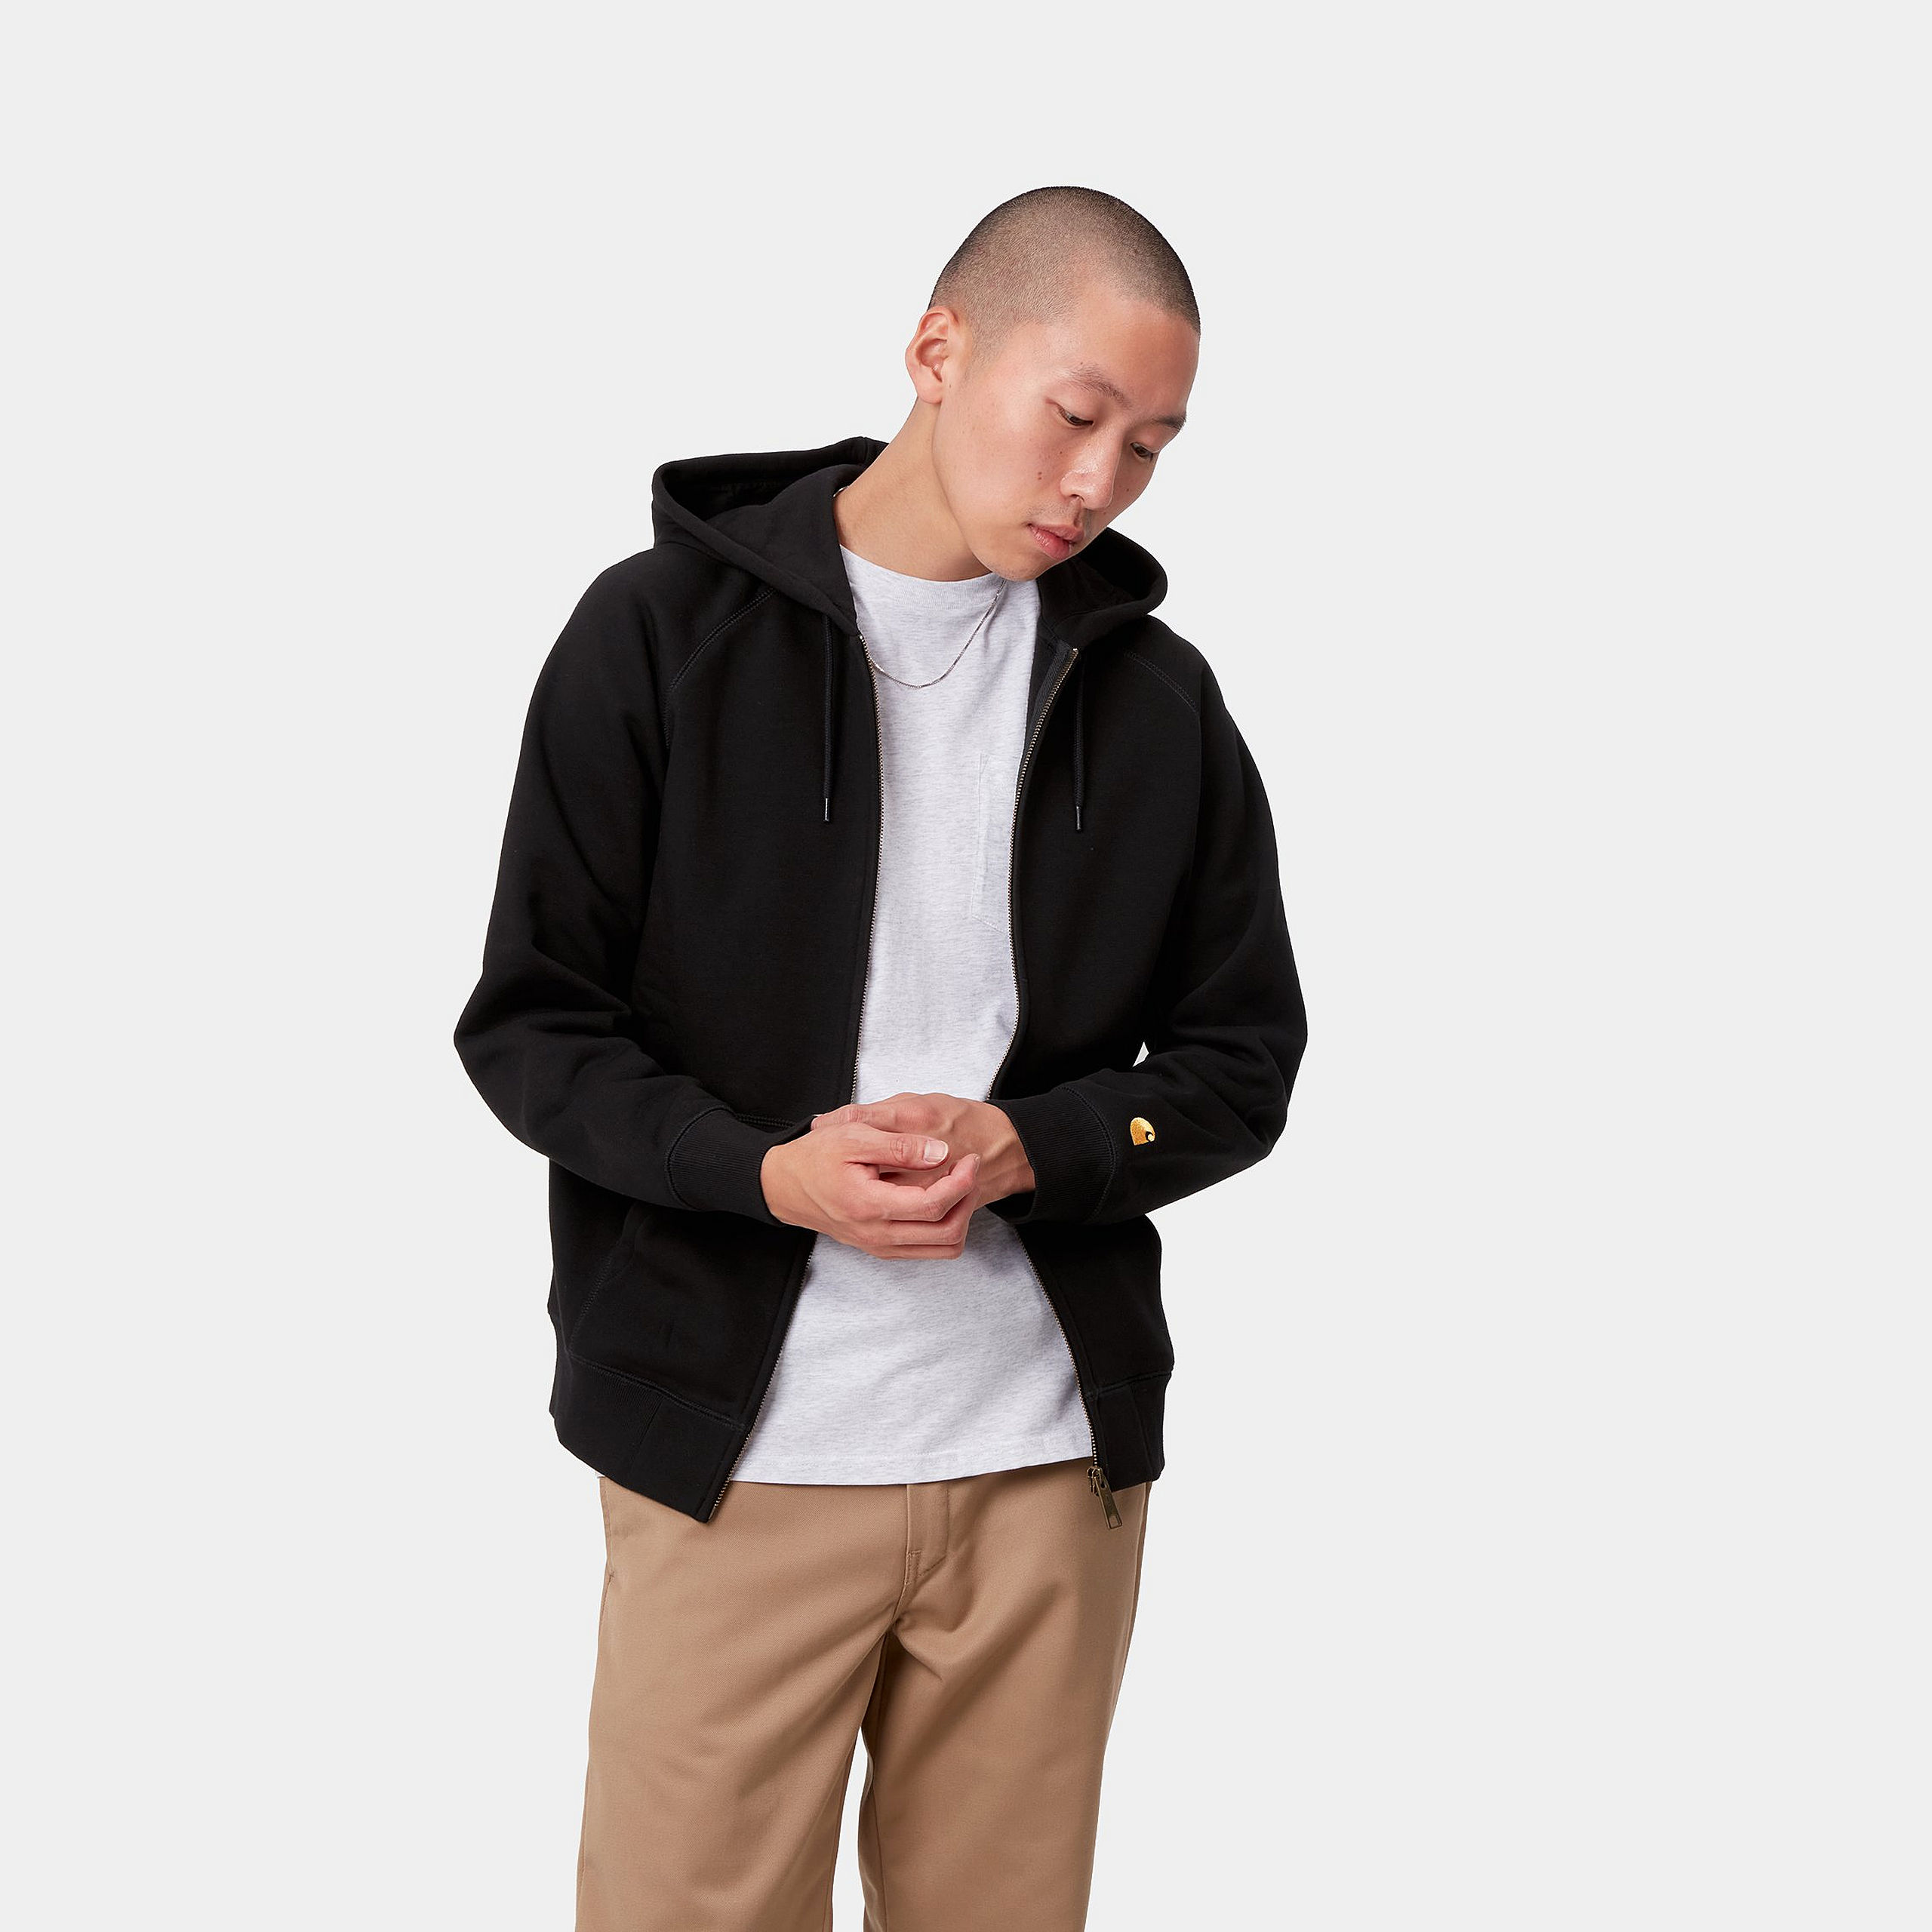 Carhartt WIP -  HOODED CHASE JACKET - Black/Gold